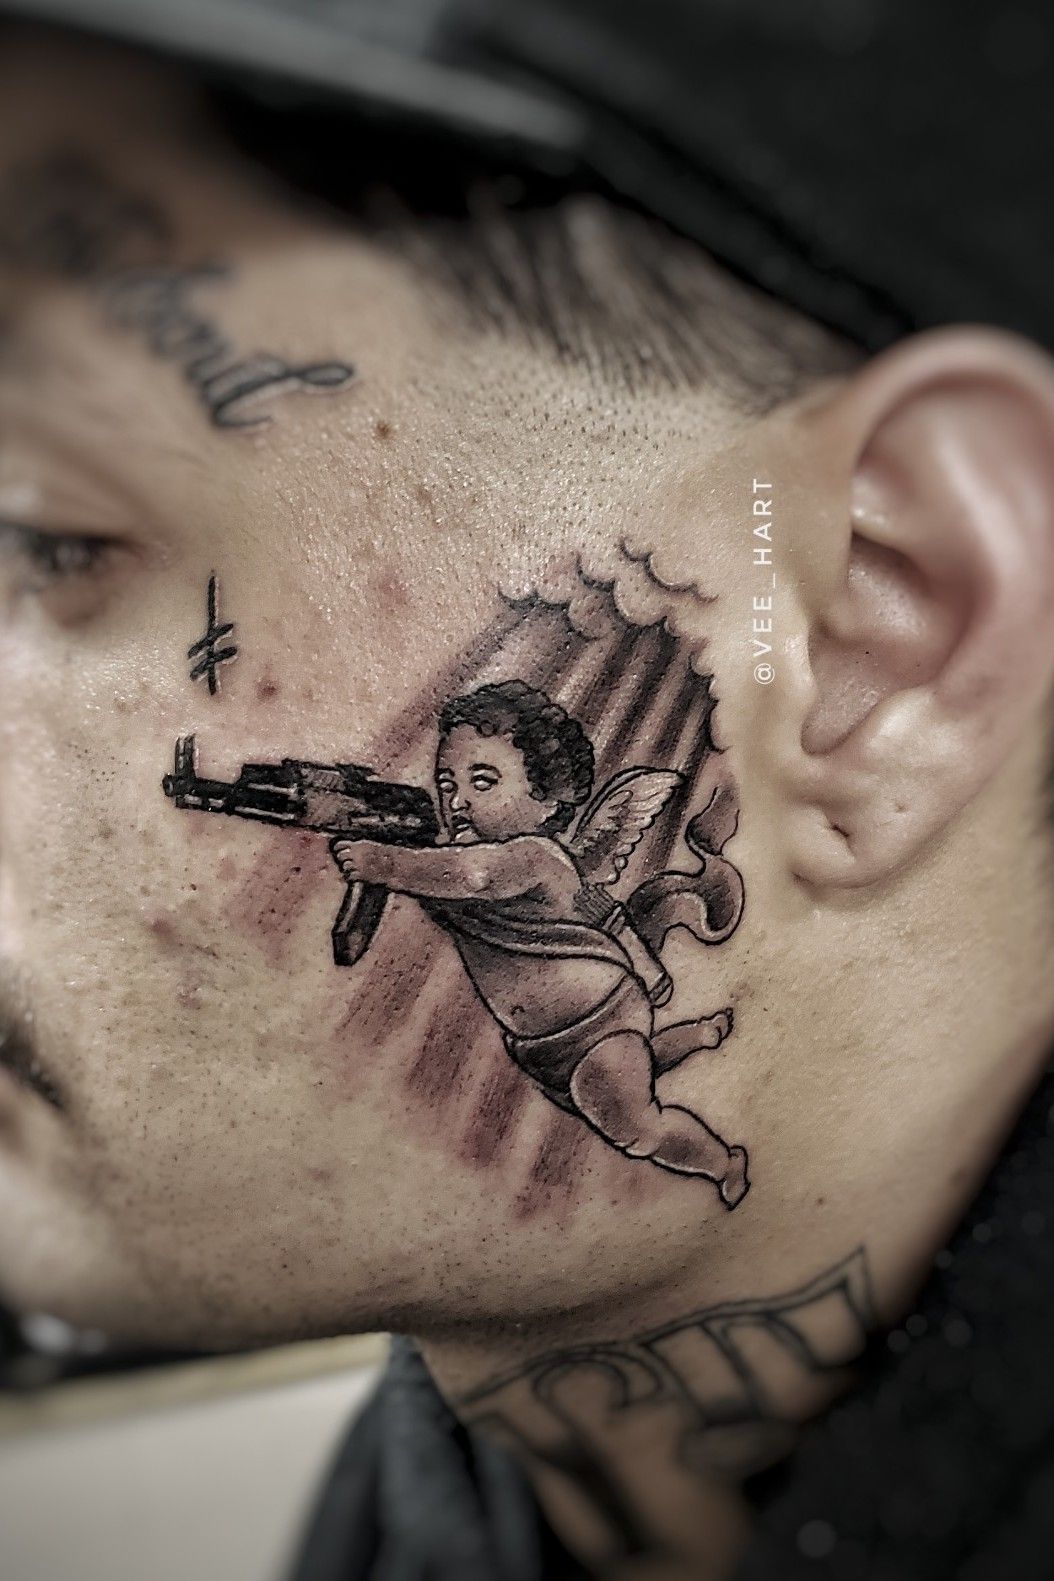 Top 45 Outstanding and Amazing Gun Tattoo Ideas  Compete Guide